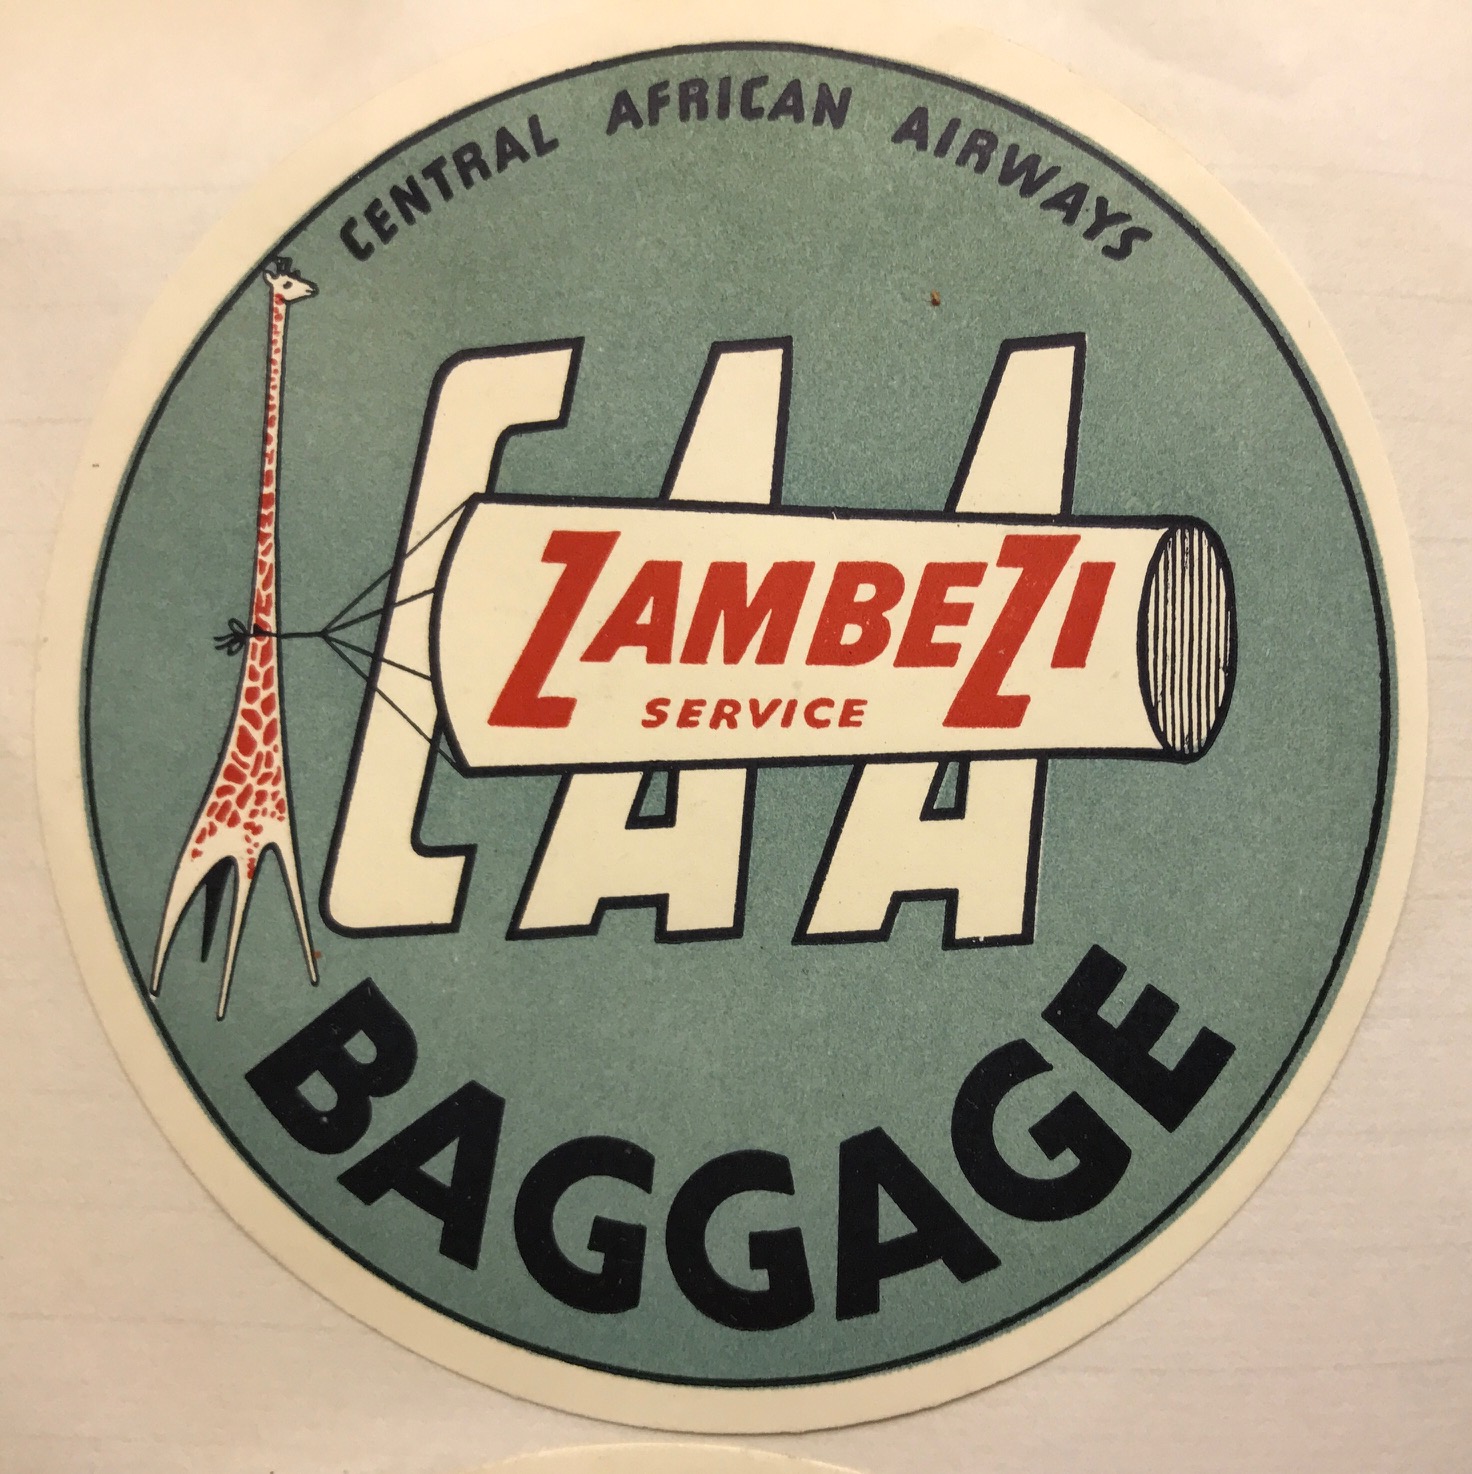 Trevor's Stickies: Central African Airways was formed in 1946. The upheaval of that part of the world led to it ceasing operations in 1967.